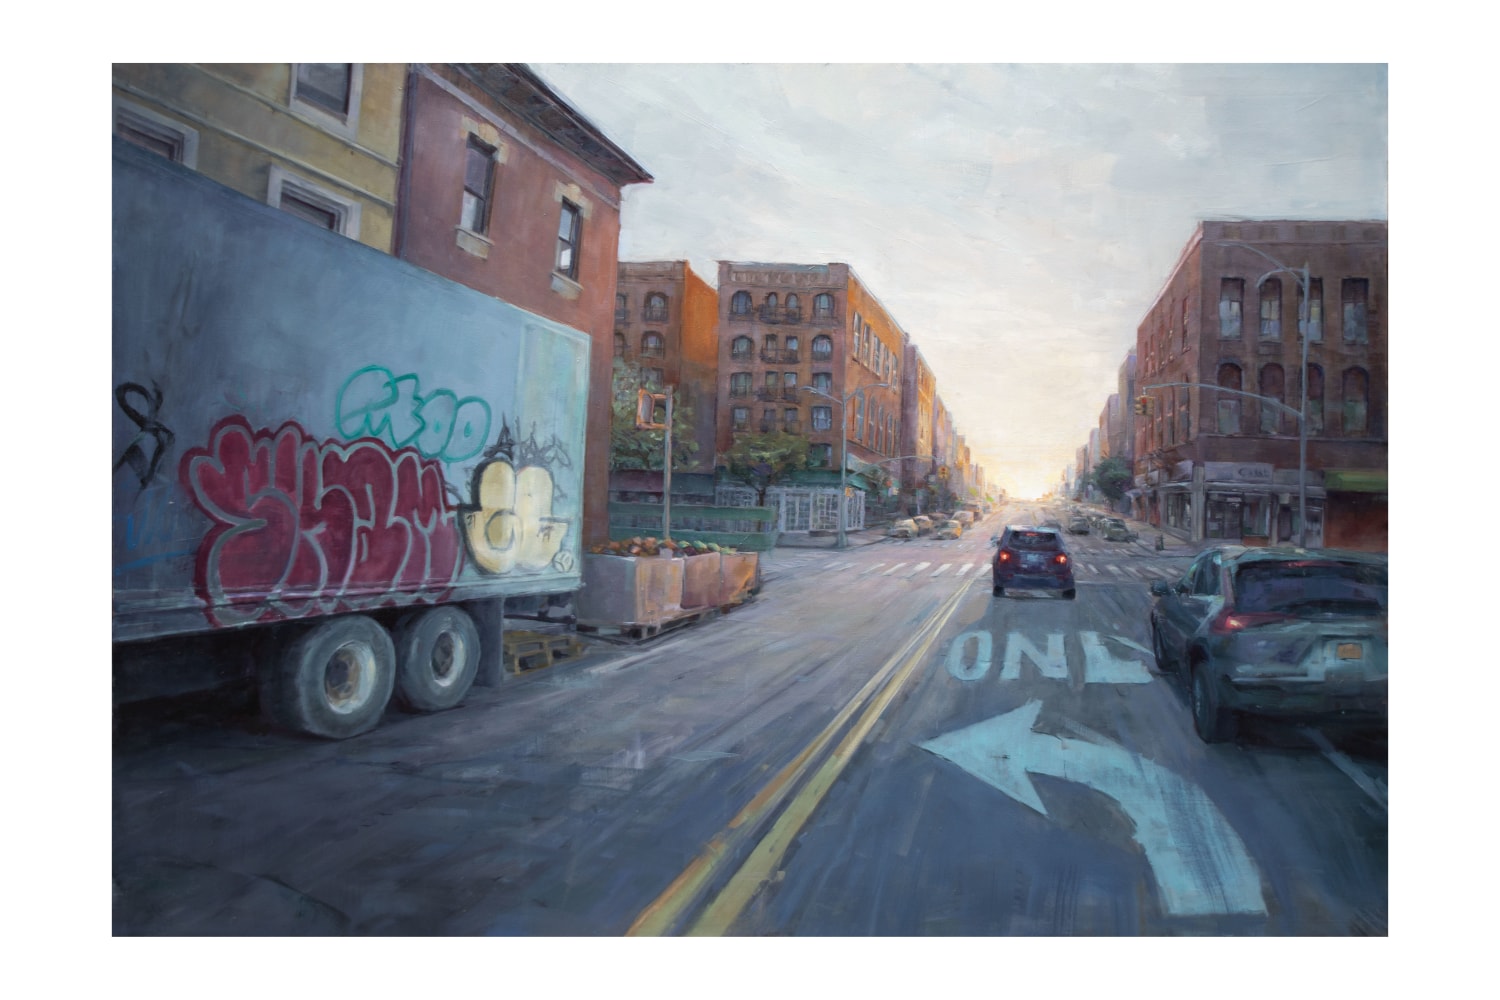 Intersection with Graffiti 

Oil

48&amp;quot; x 72&amp;quot; x 2&amp;quot;